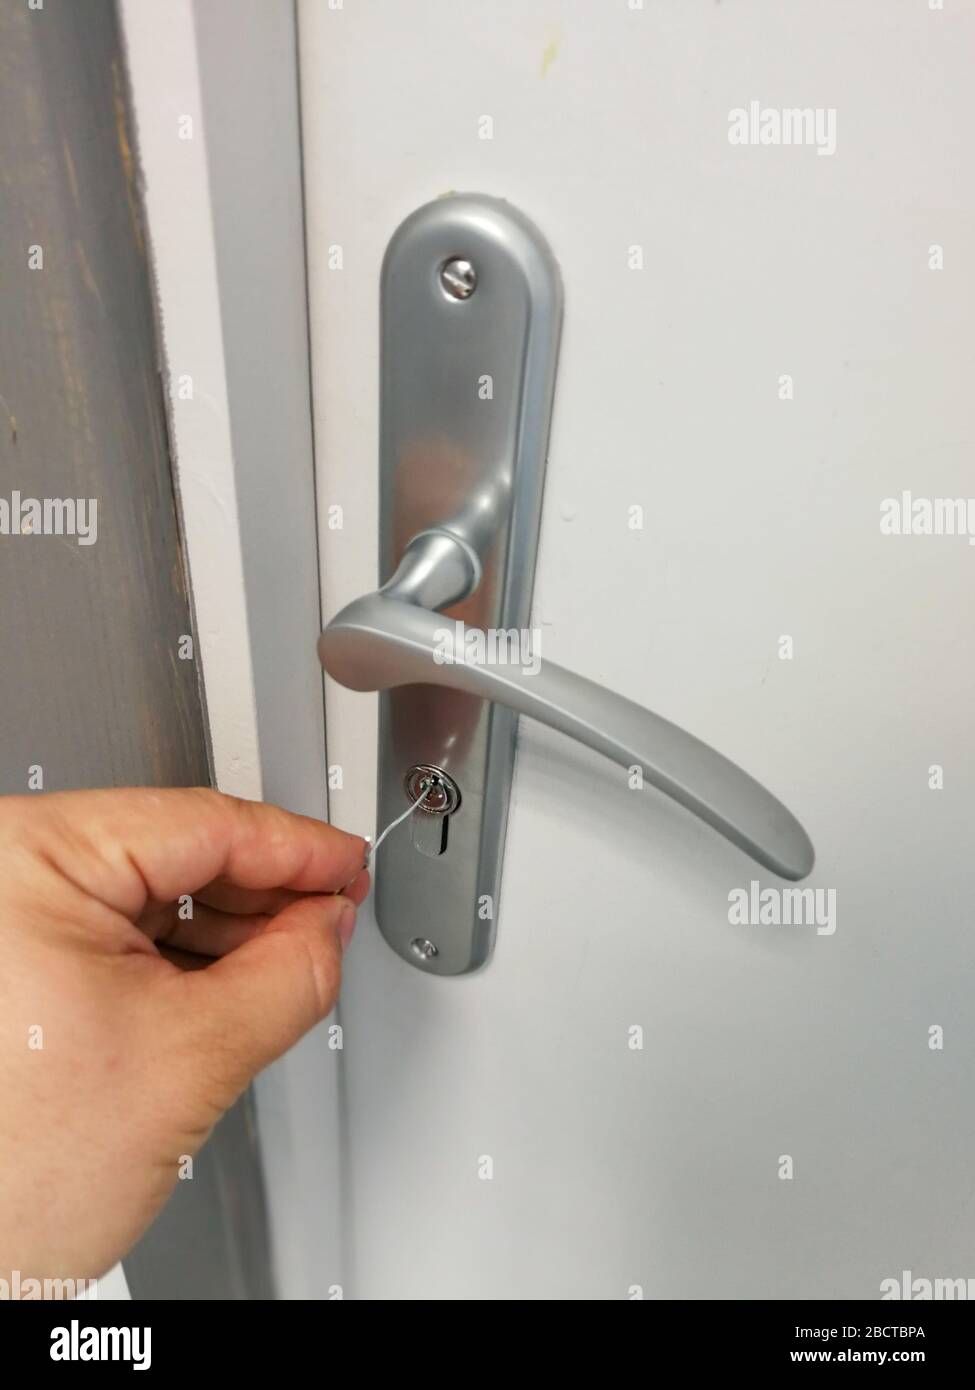 Small metal wire inserted in the keyhole of the door for unlocking doors without key Stock Photo